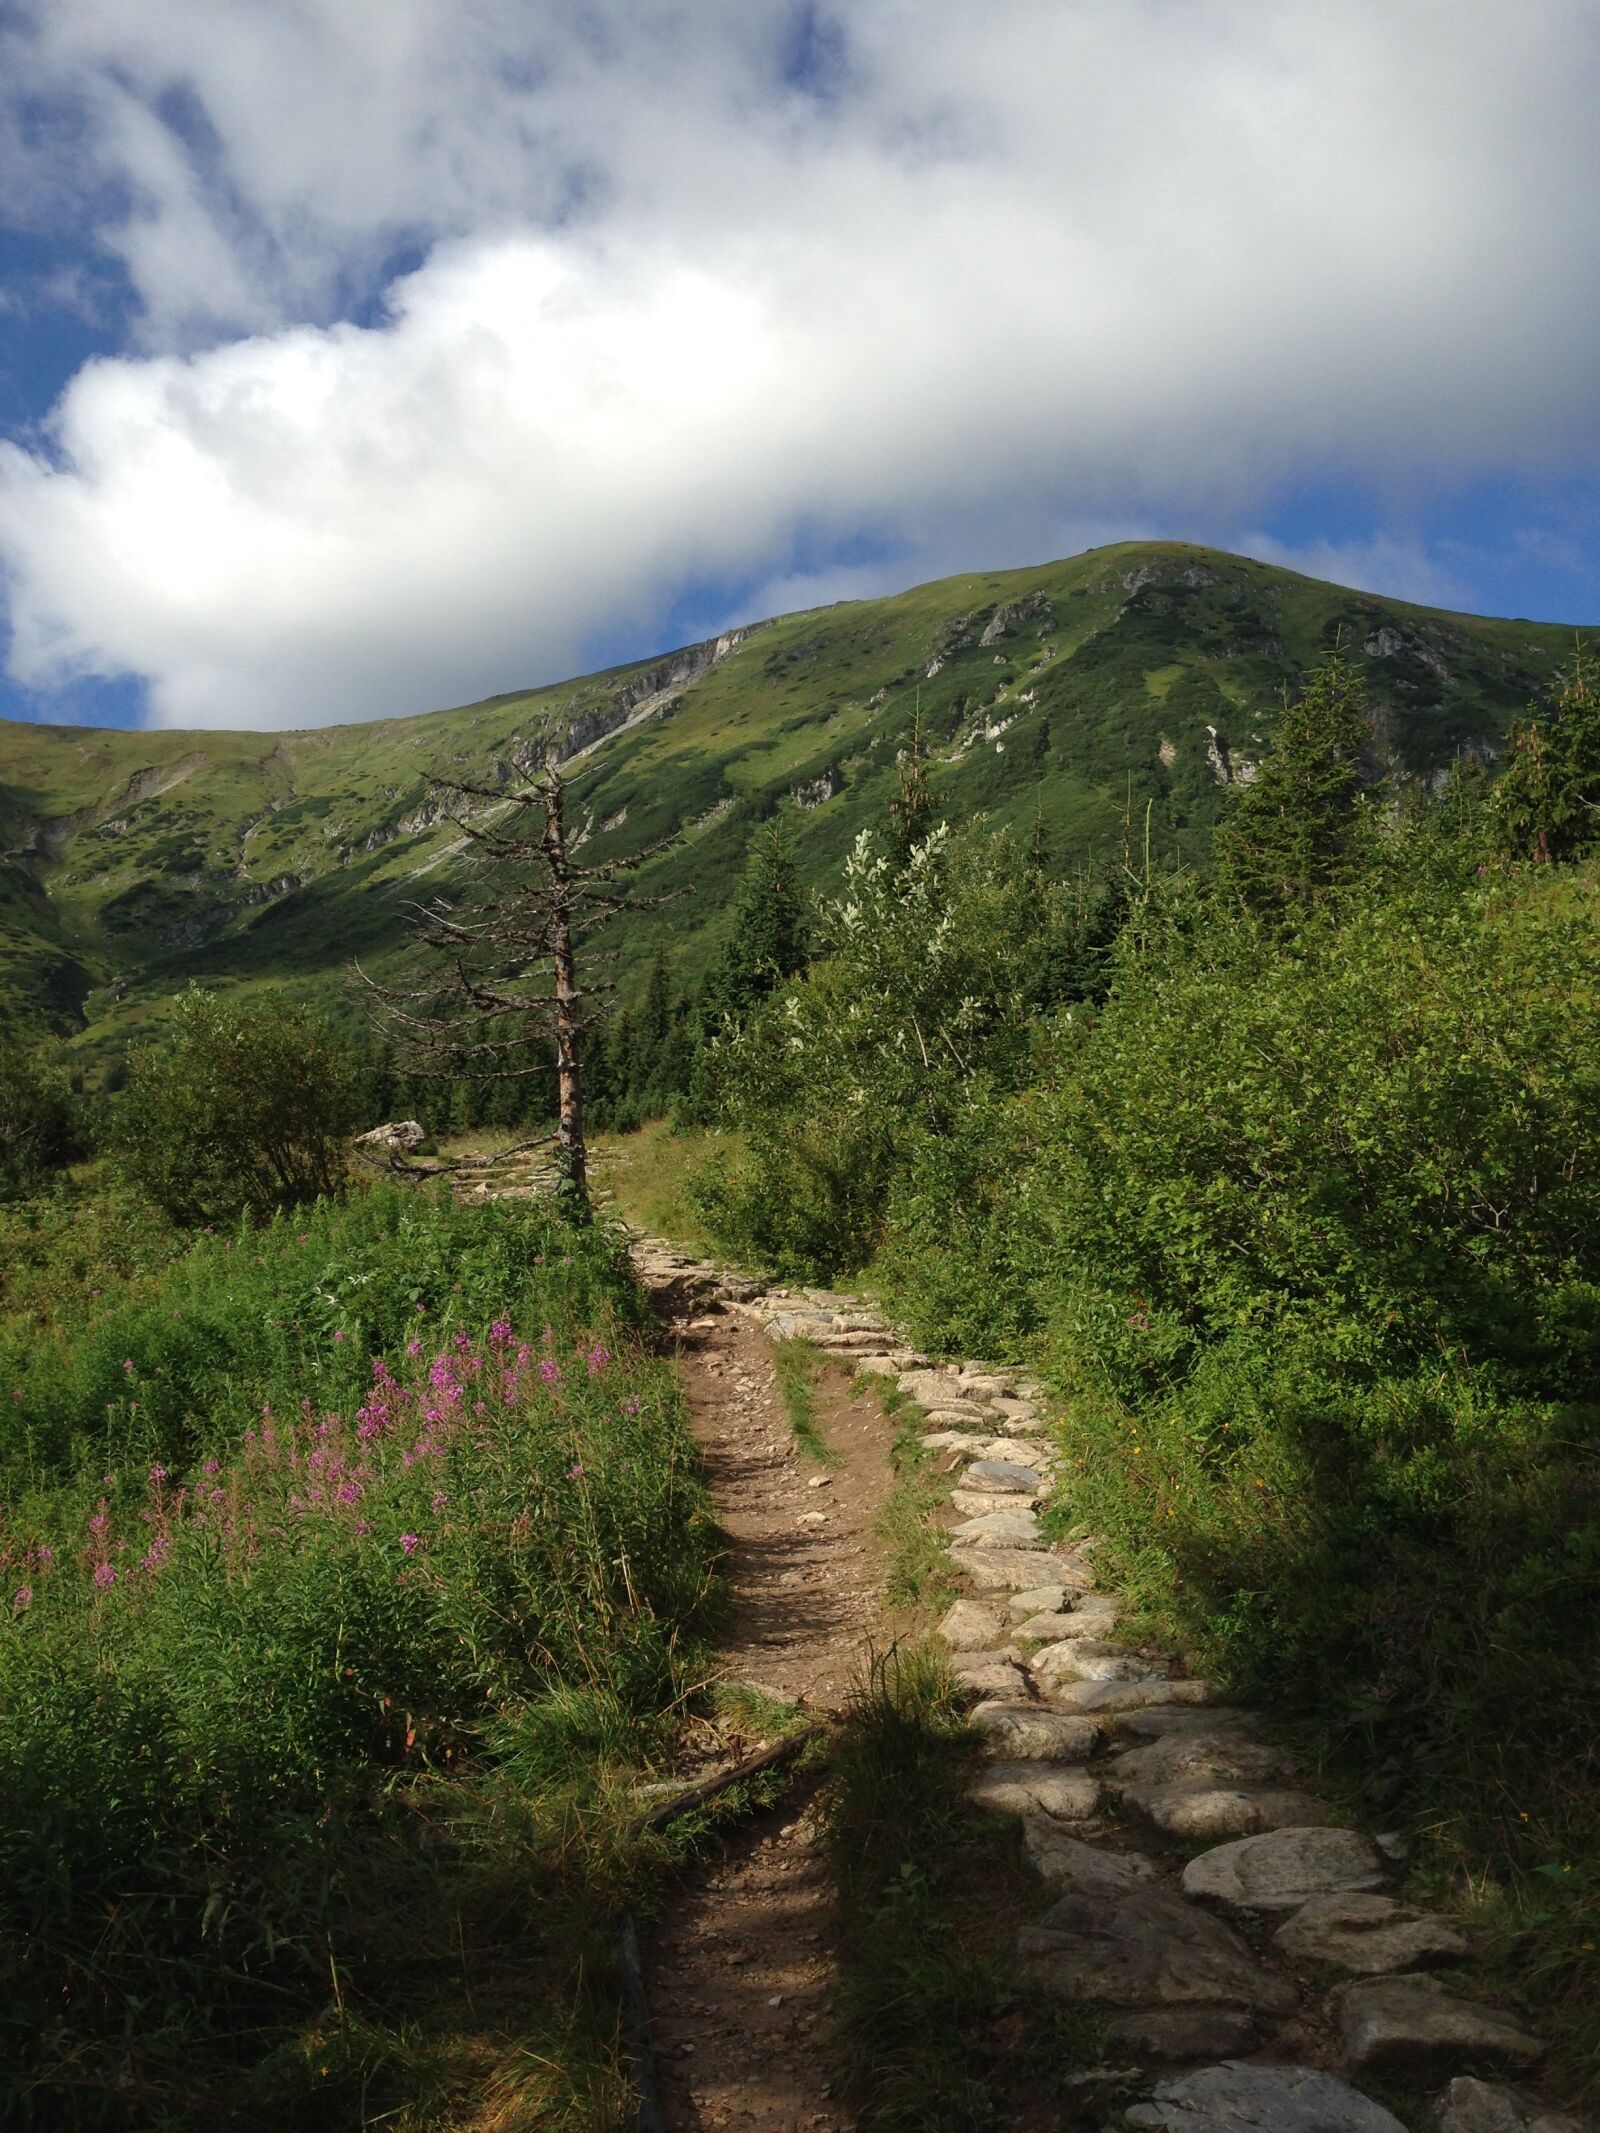 Apple iPhone 5c sample photo. Tatry, mountains, landscape photography